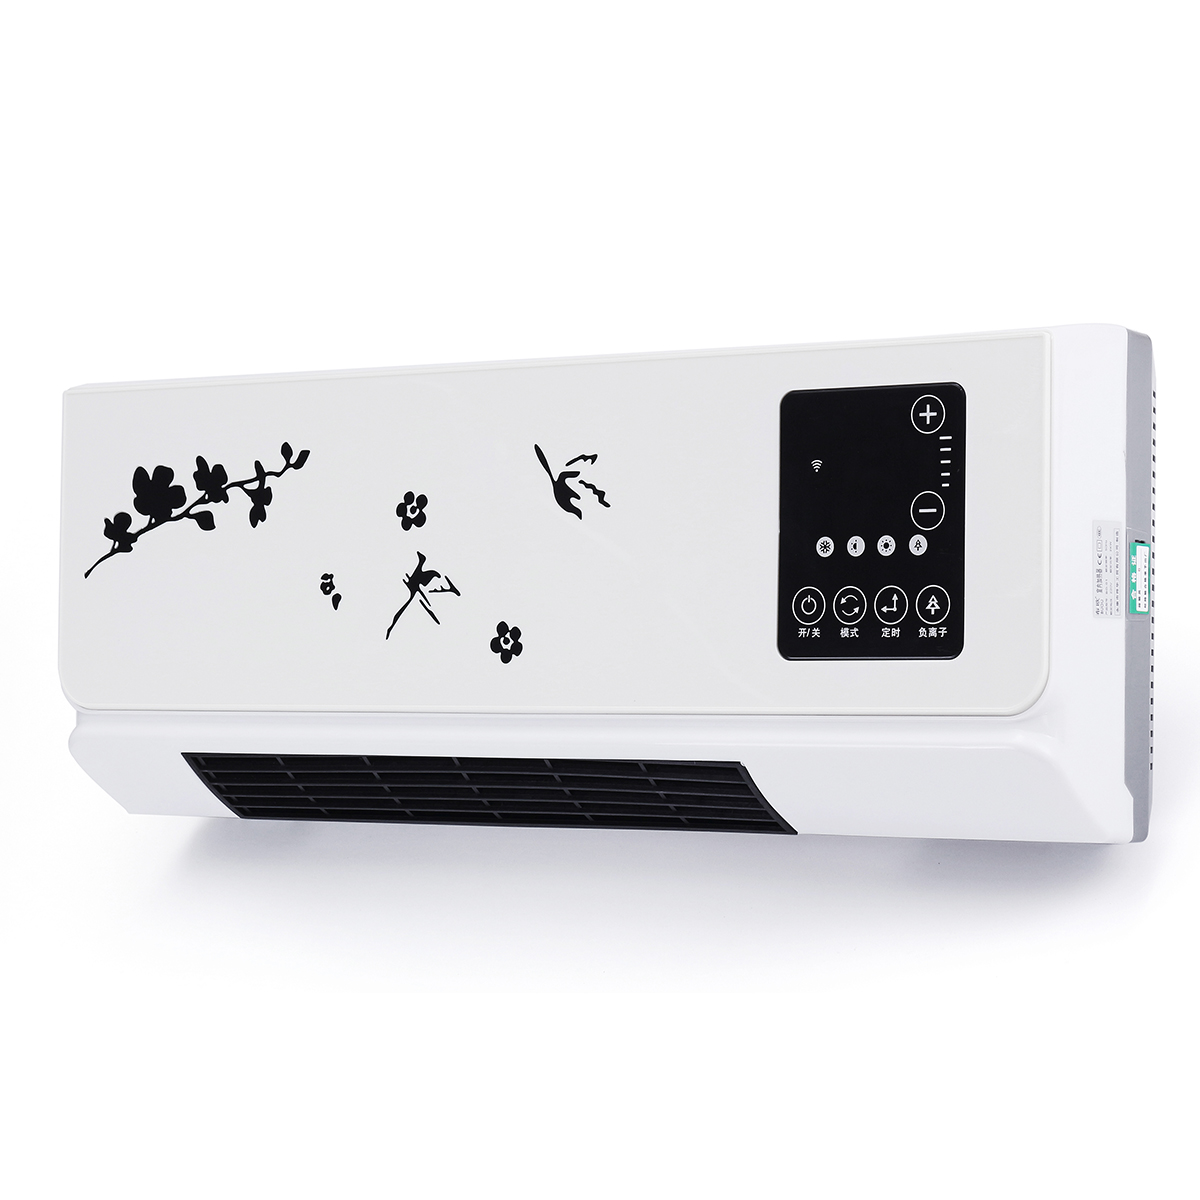 

2000W Wall Mounted/Desktop Heater Air Conditioner Dehumidifier Clothes Dryer with Remote Control